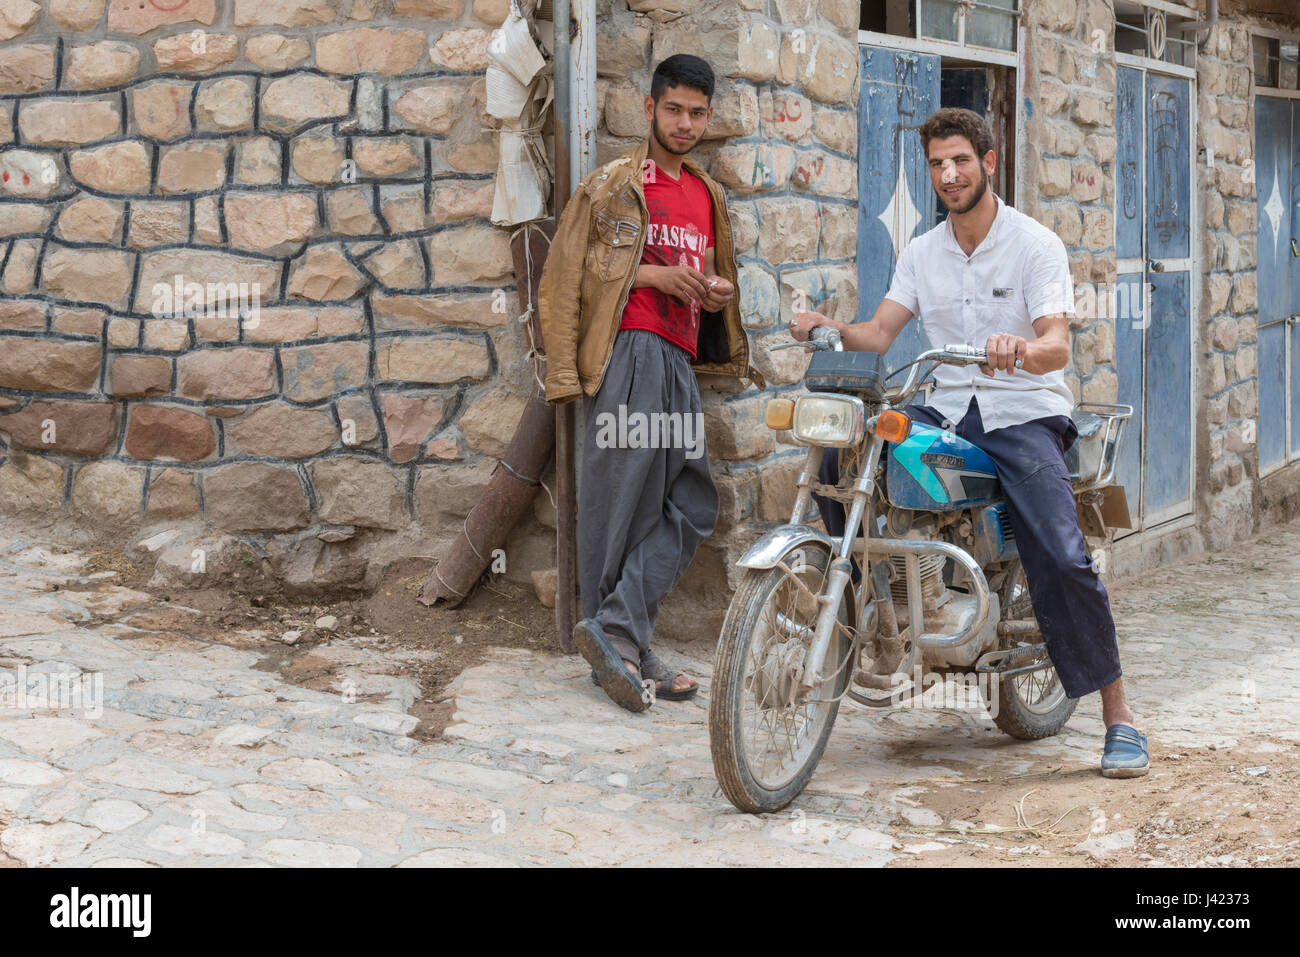 Young Men With A Motorcycle, Esfidan, A Traditional Rural Village, North Khorasan Province, IRAN Stock Photo